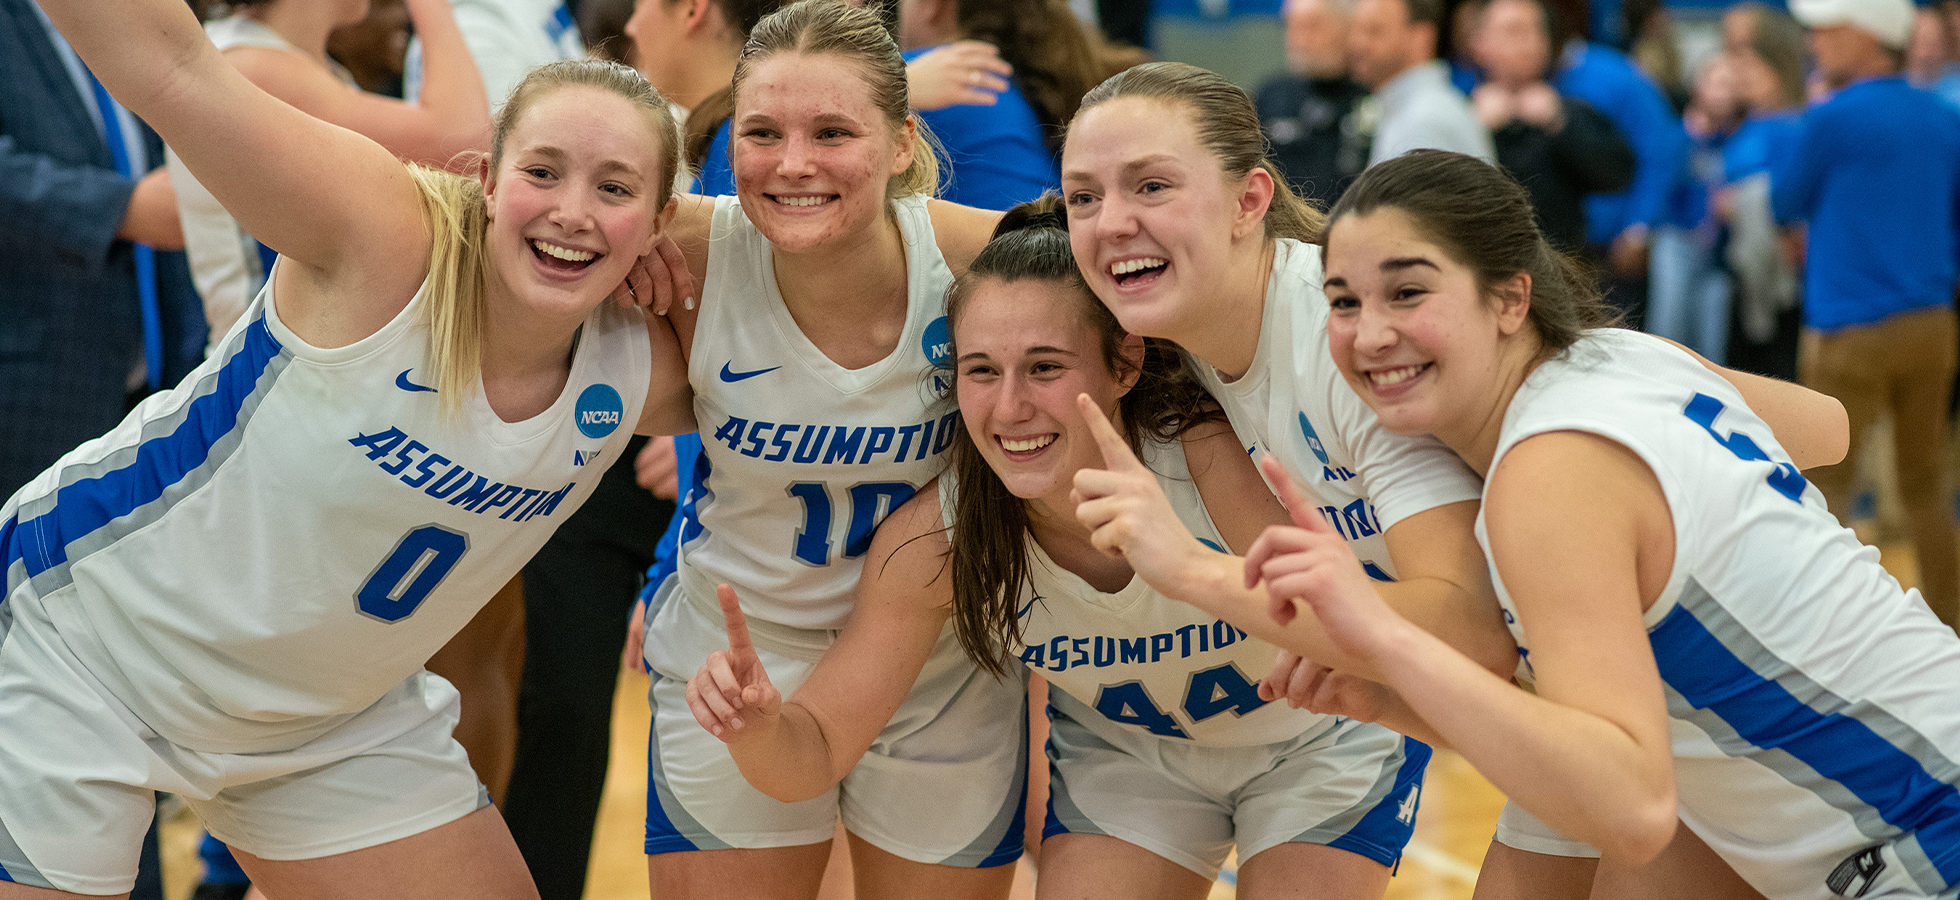 NCAA Division II Women's Basketball East Regional Champion Assumption Greyhounds will compete in the Elite Eight in St. Joseph, Missouri on March 20 against the University of Minnesota Duluth Bulldogs